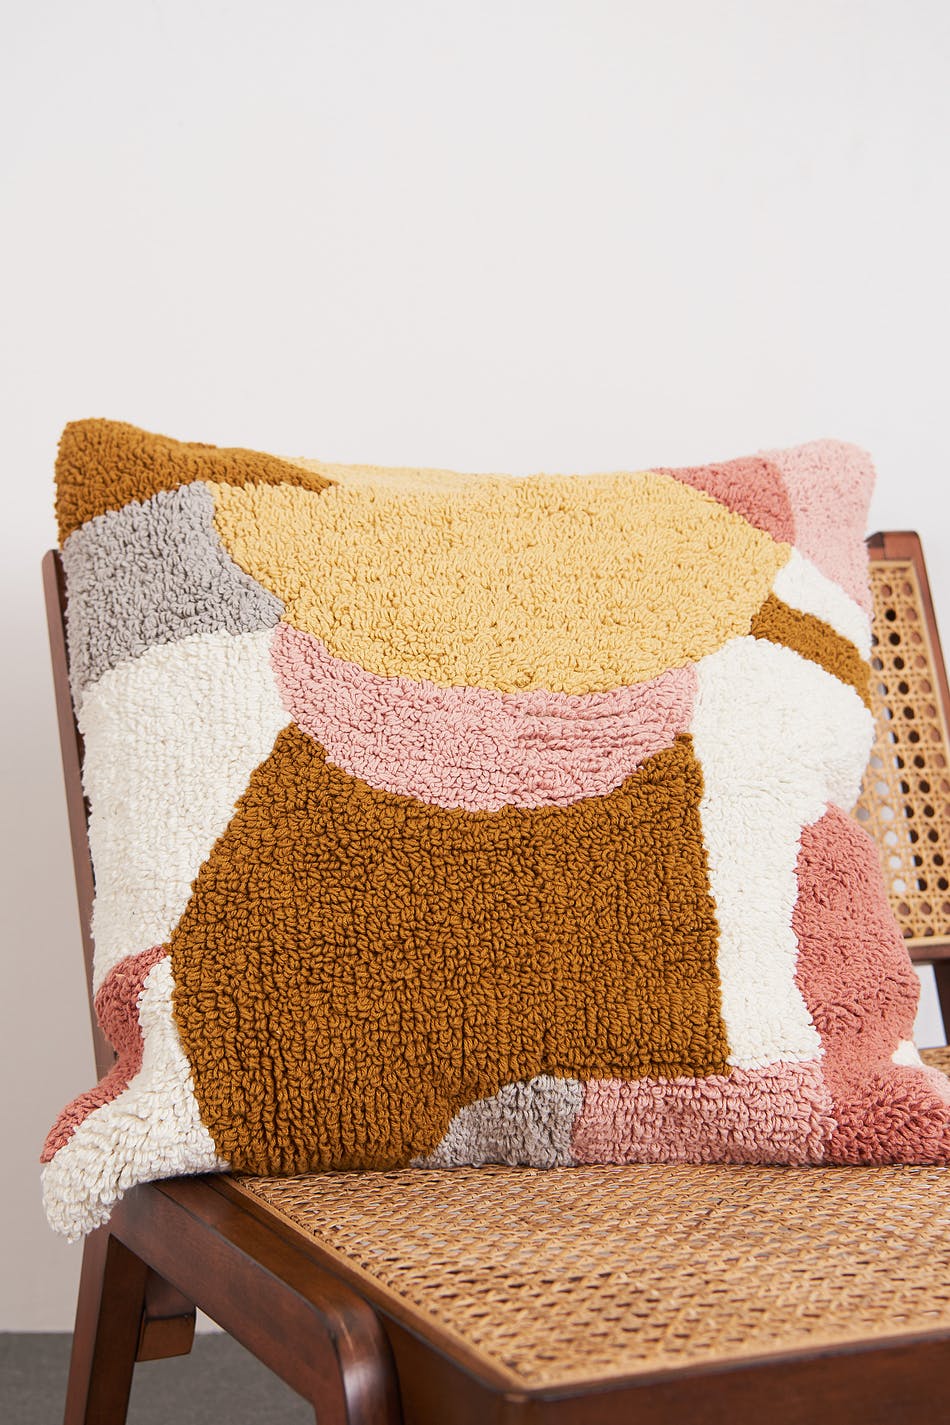 Structured cushion cover